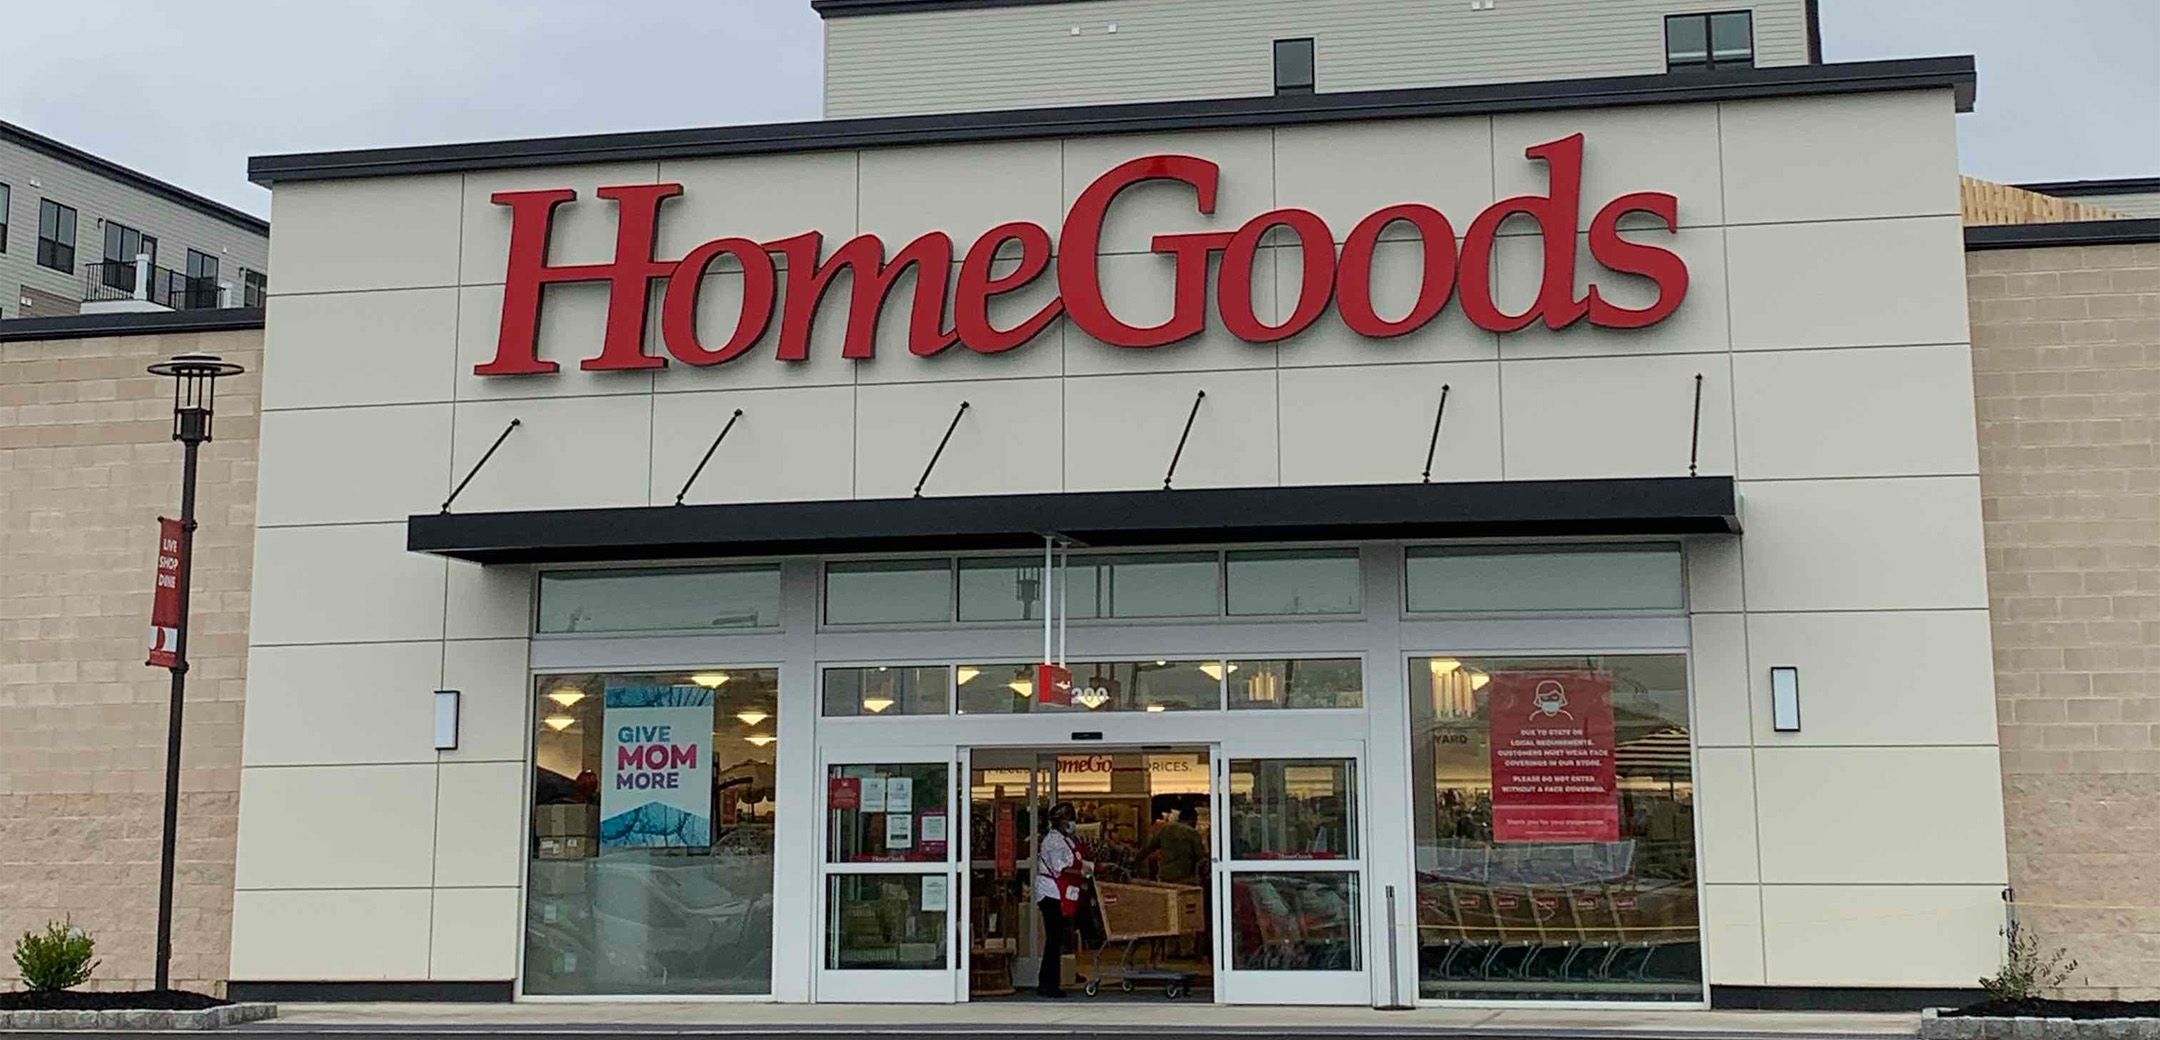 The exterior of the Homegoods building showcasing the brick and concrete slab design with red ``HomeGoods`` signage above the automatic front doors and driveway.